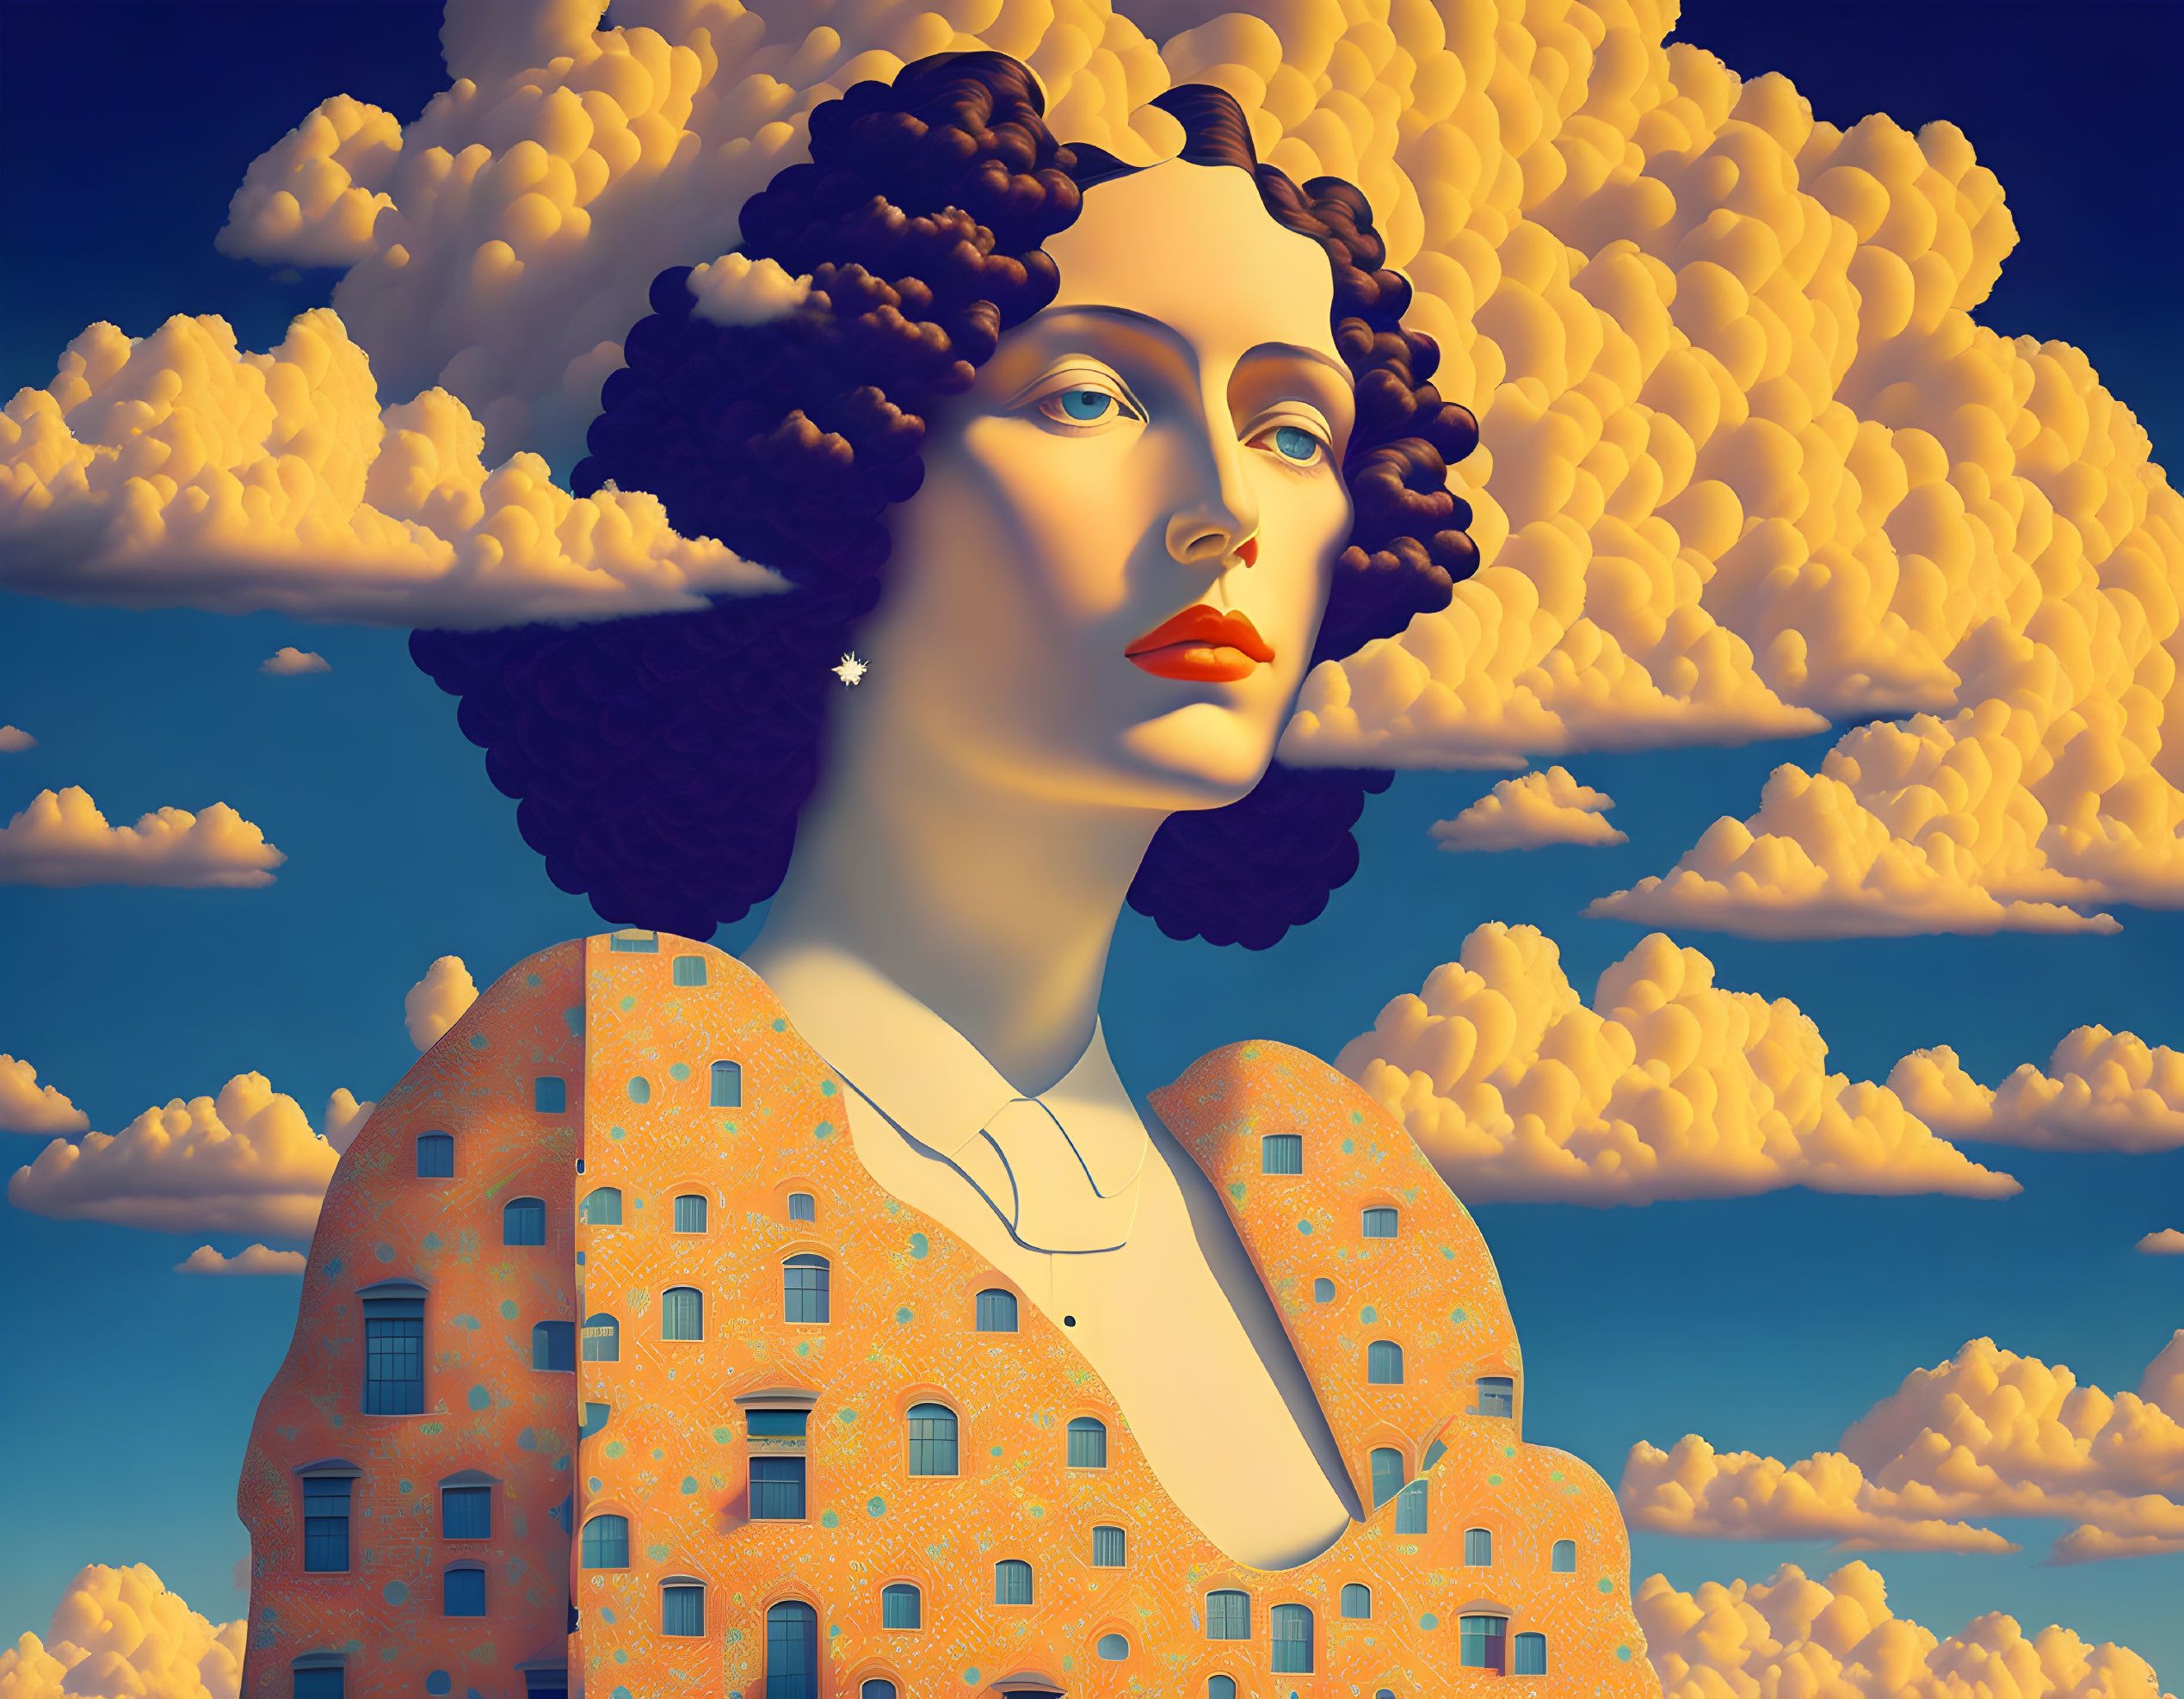 Surreal artwork: Woman's face merged with building under cloudy sky